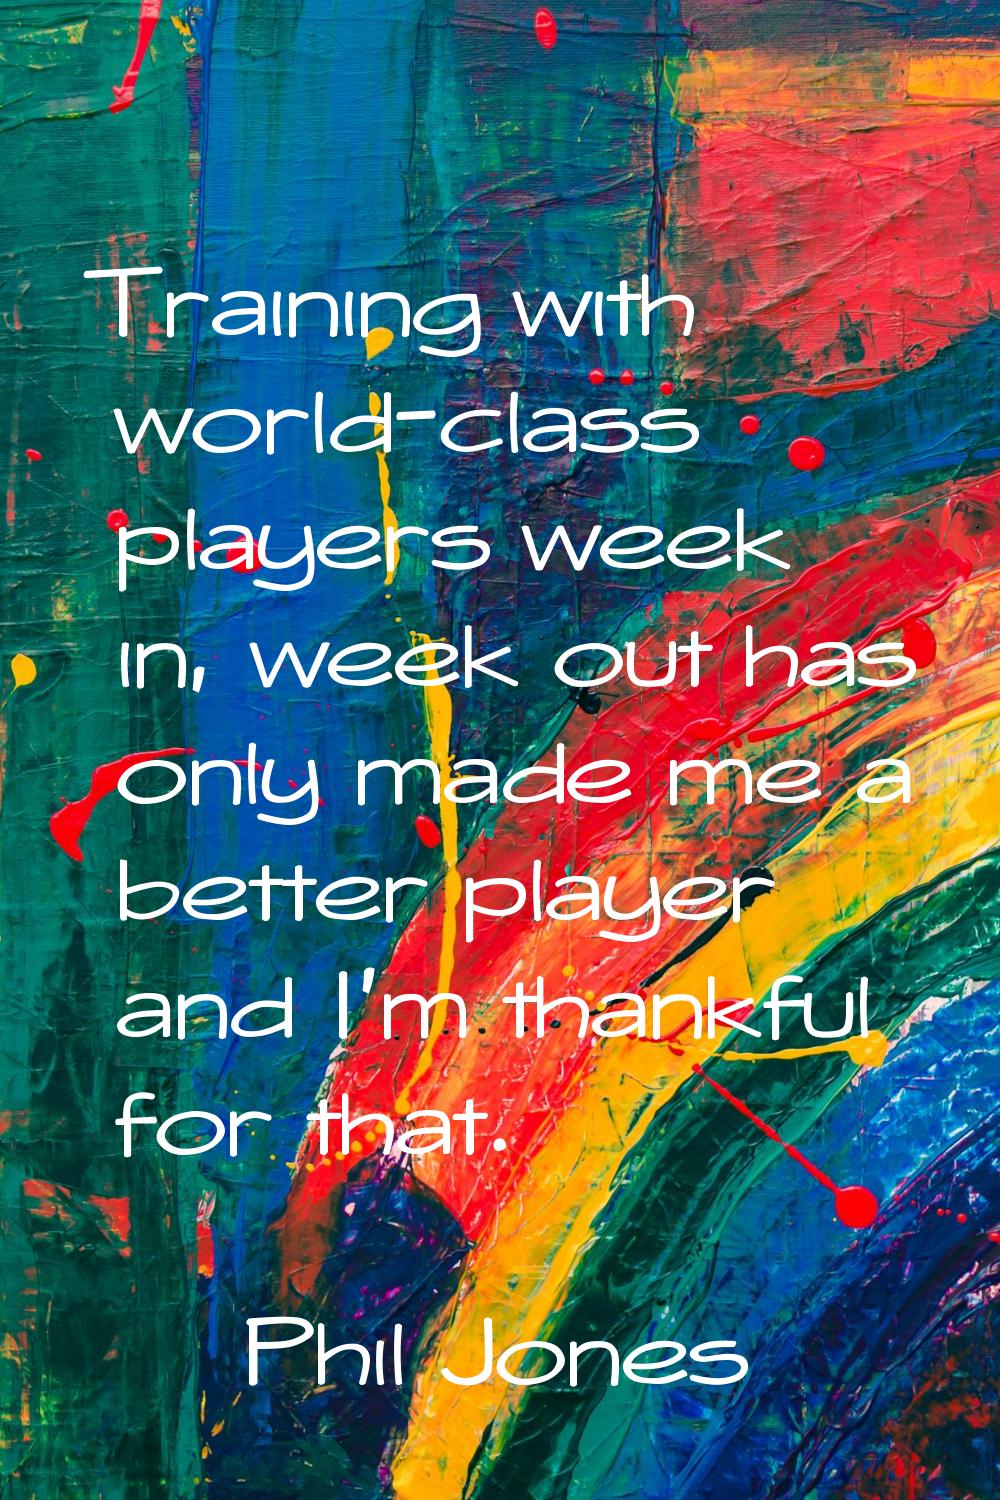 Training with world-class players week in, week out has only made me a better player and I'm thankf